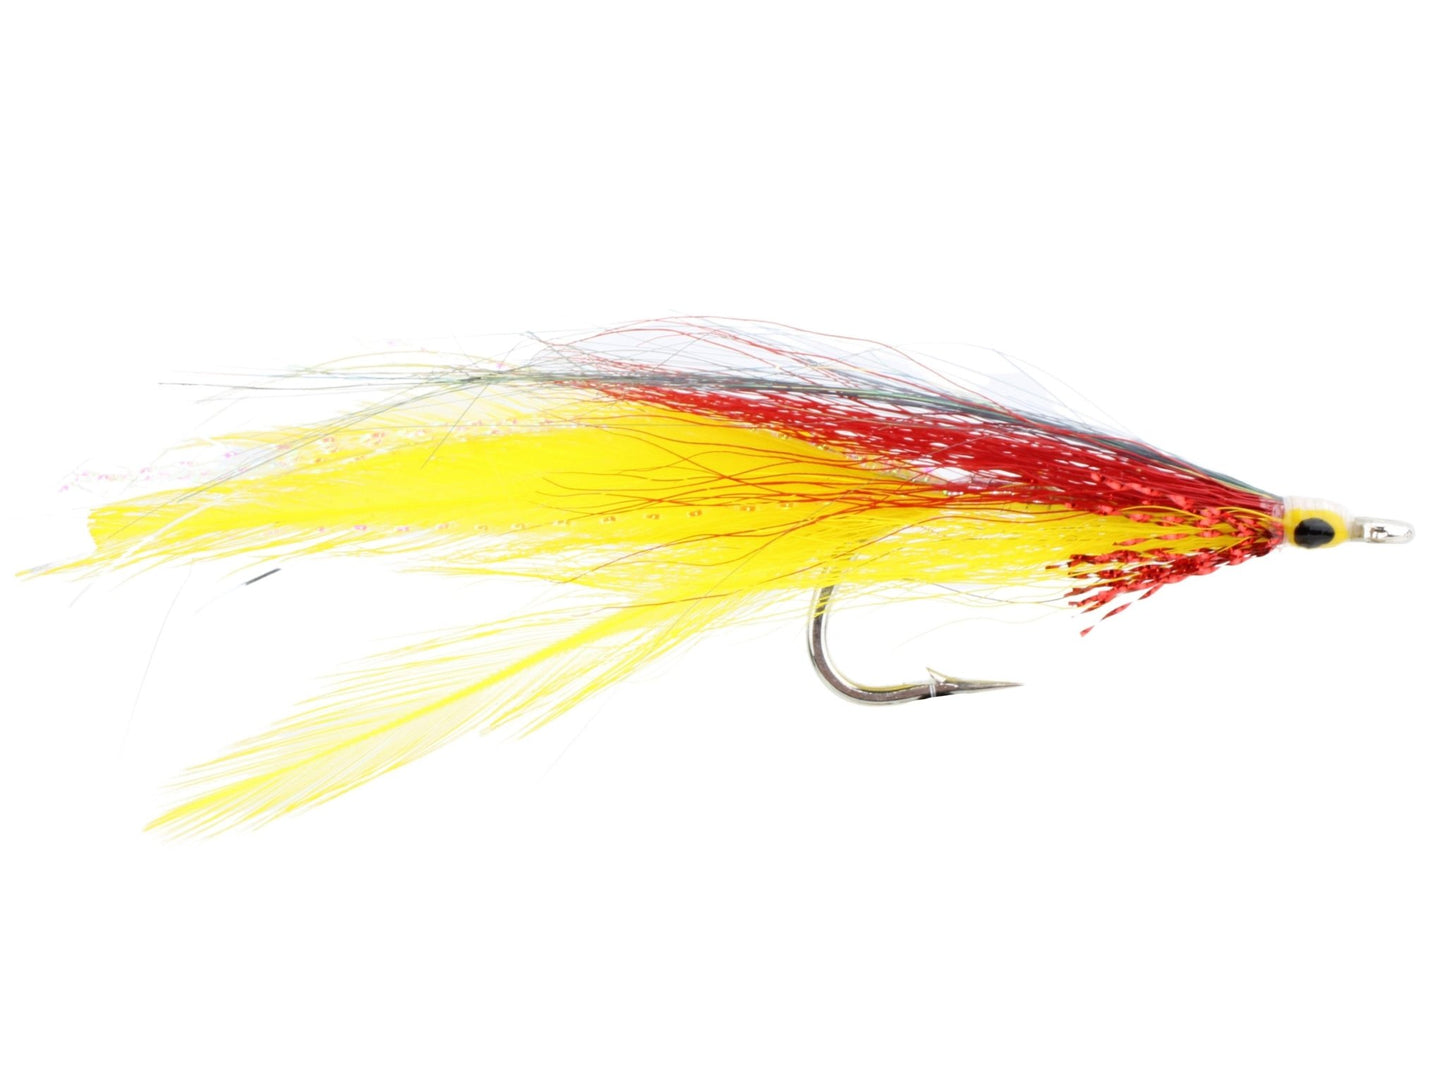 Wild Water Fly Fishing Yellow and Red Deceiver, size 2/0, qty. 3 - Angler's Pro Tackle & Outdoors